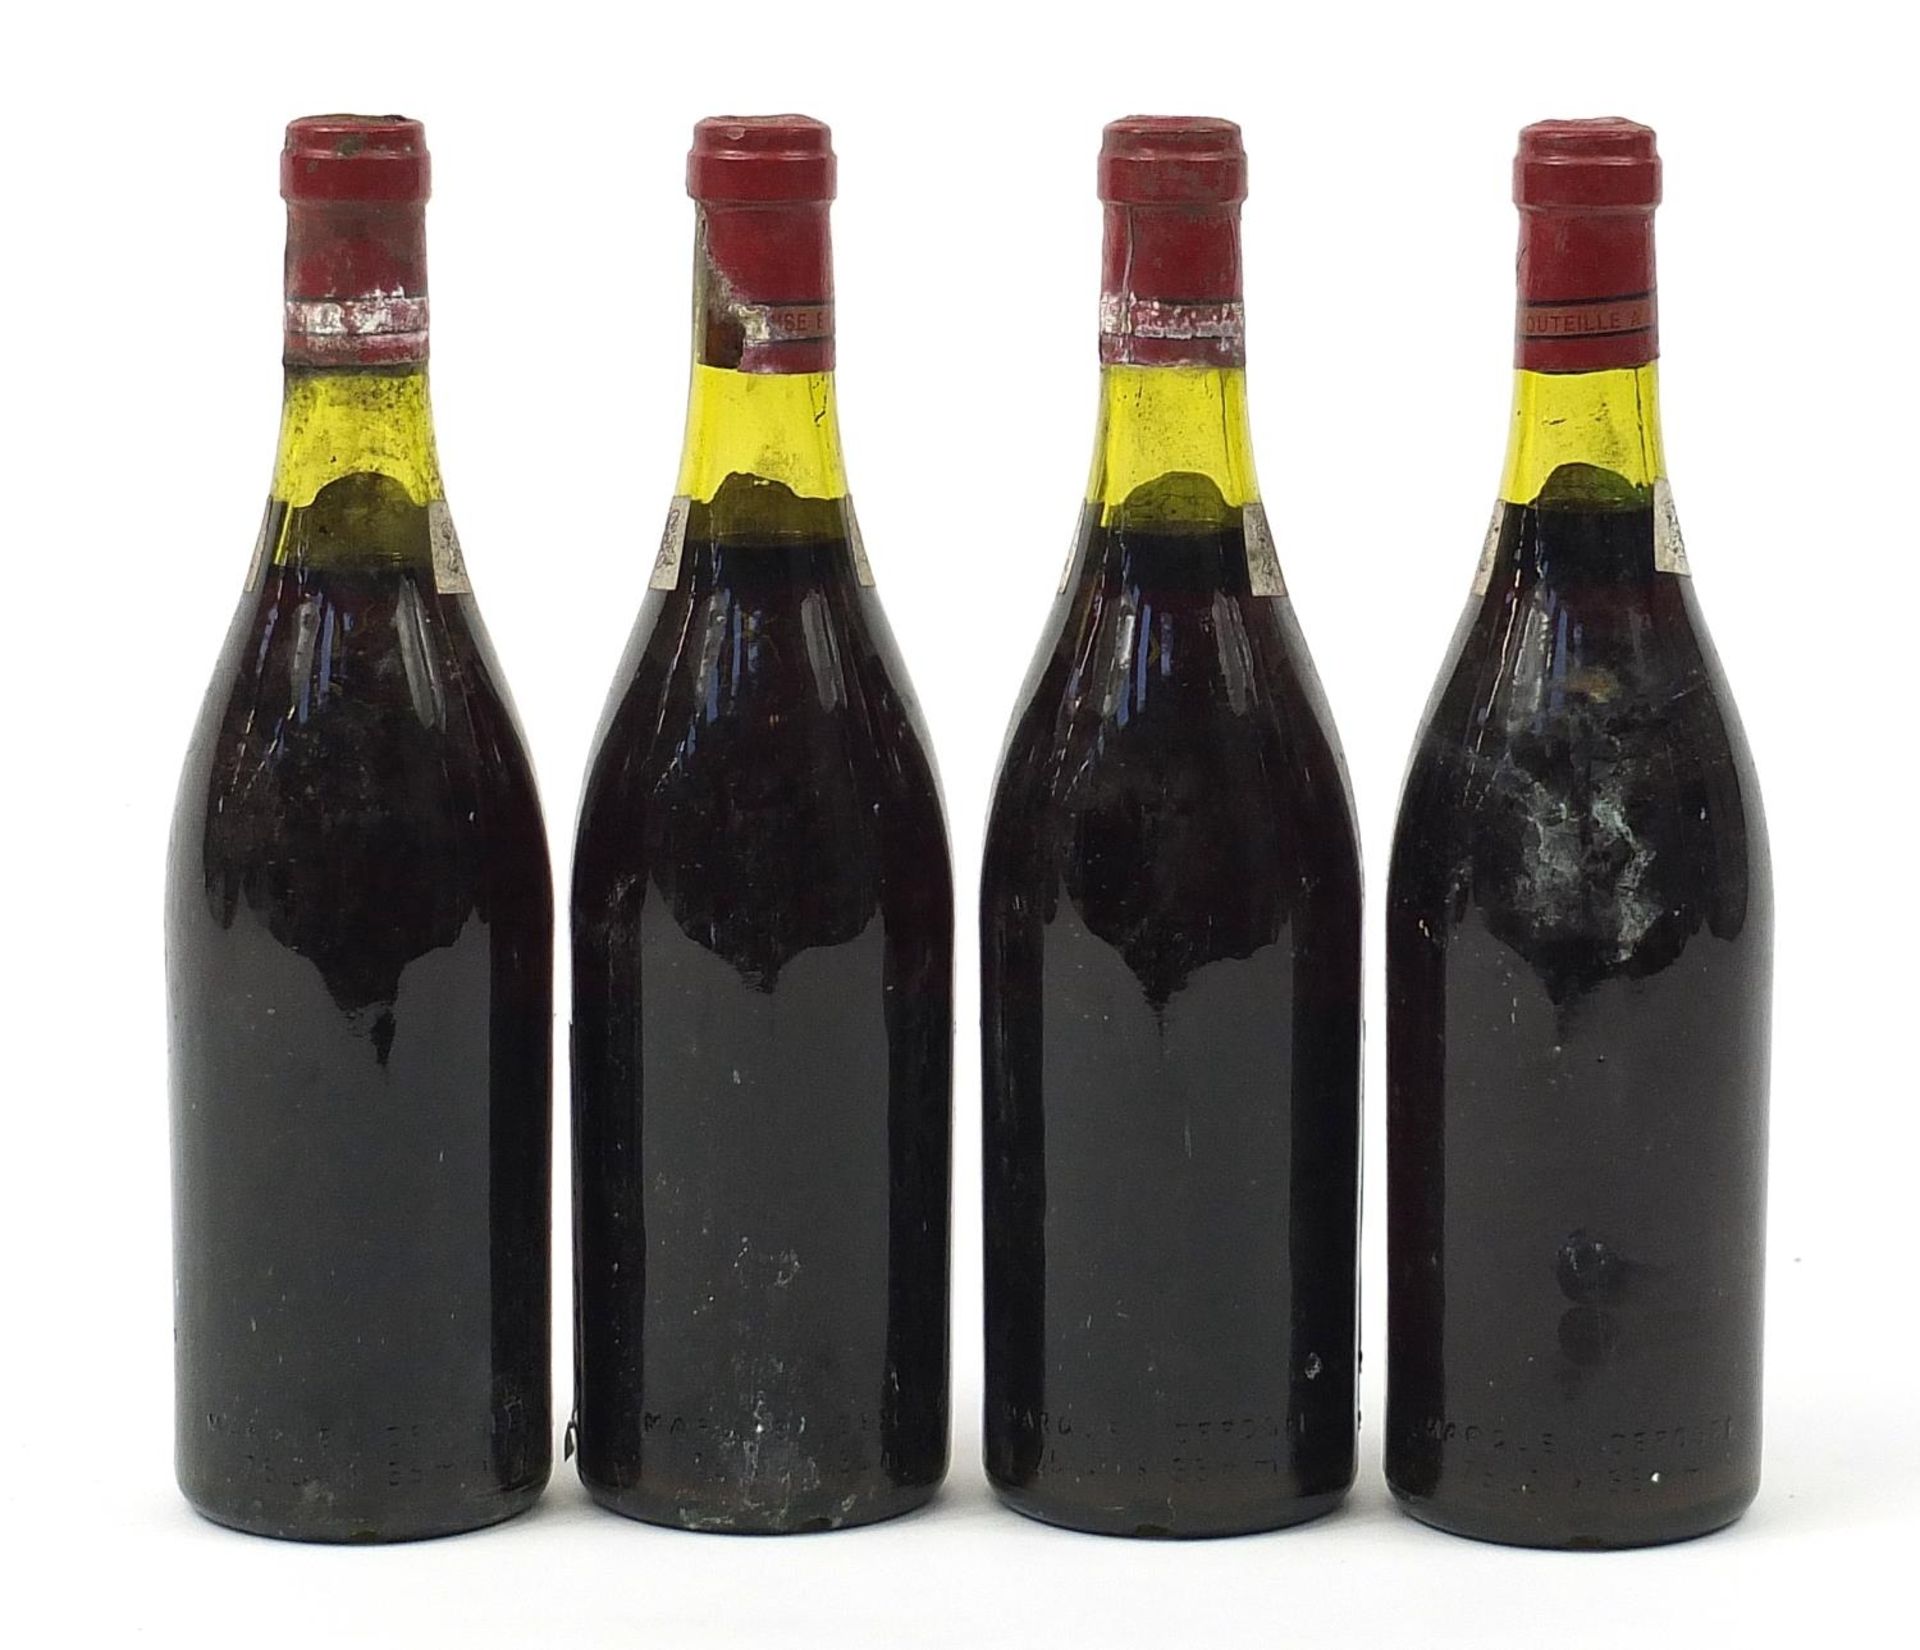 Four bottles of 1979 Vieux Telegraphe Chateauneuf du Pape red wine - Image 2 of 2